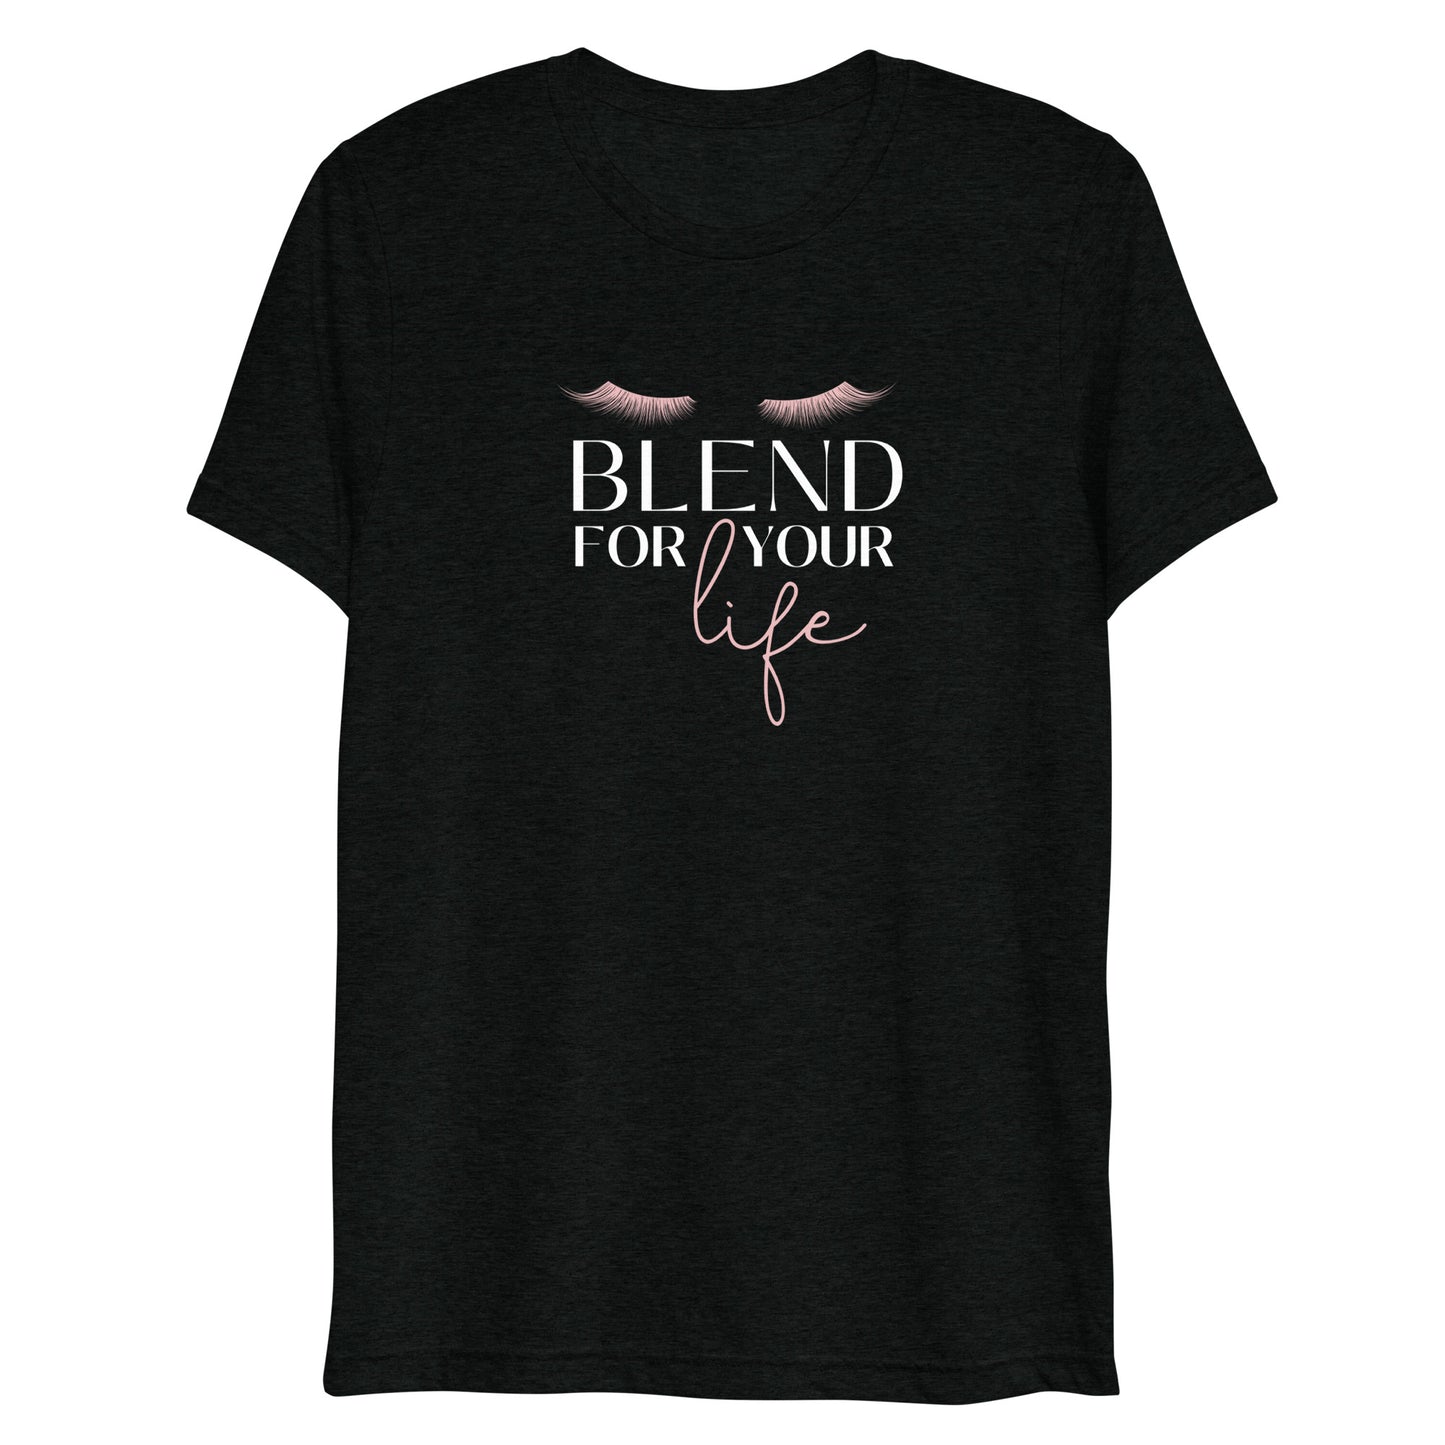 Blend for your life Short sleeve fitted t-shirt